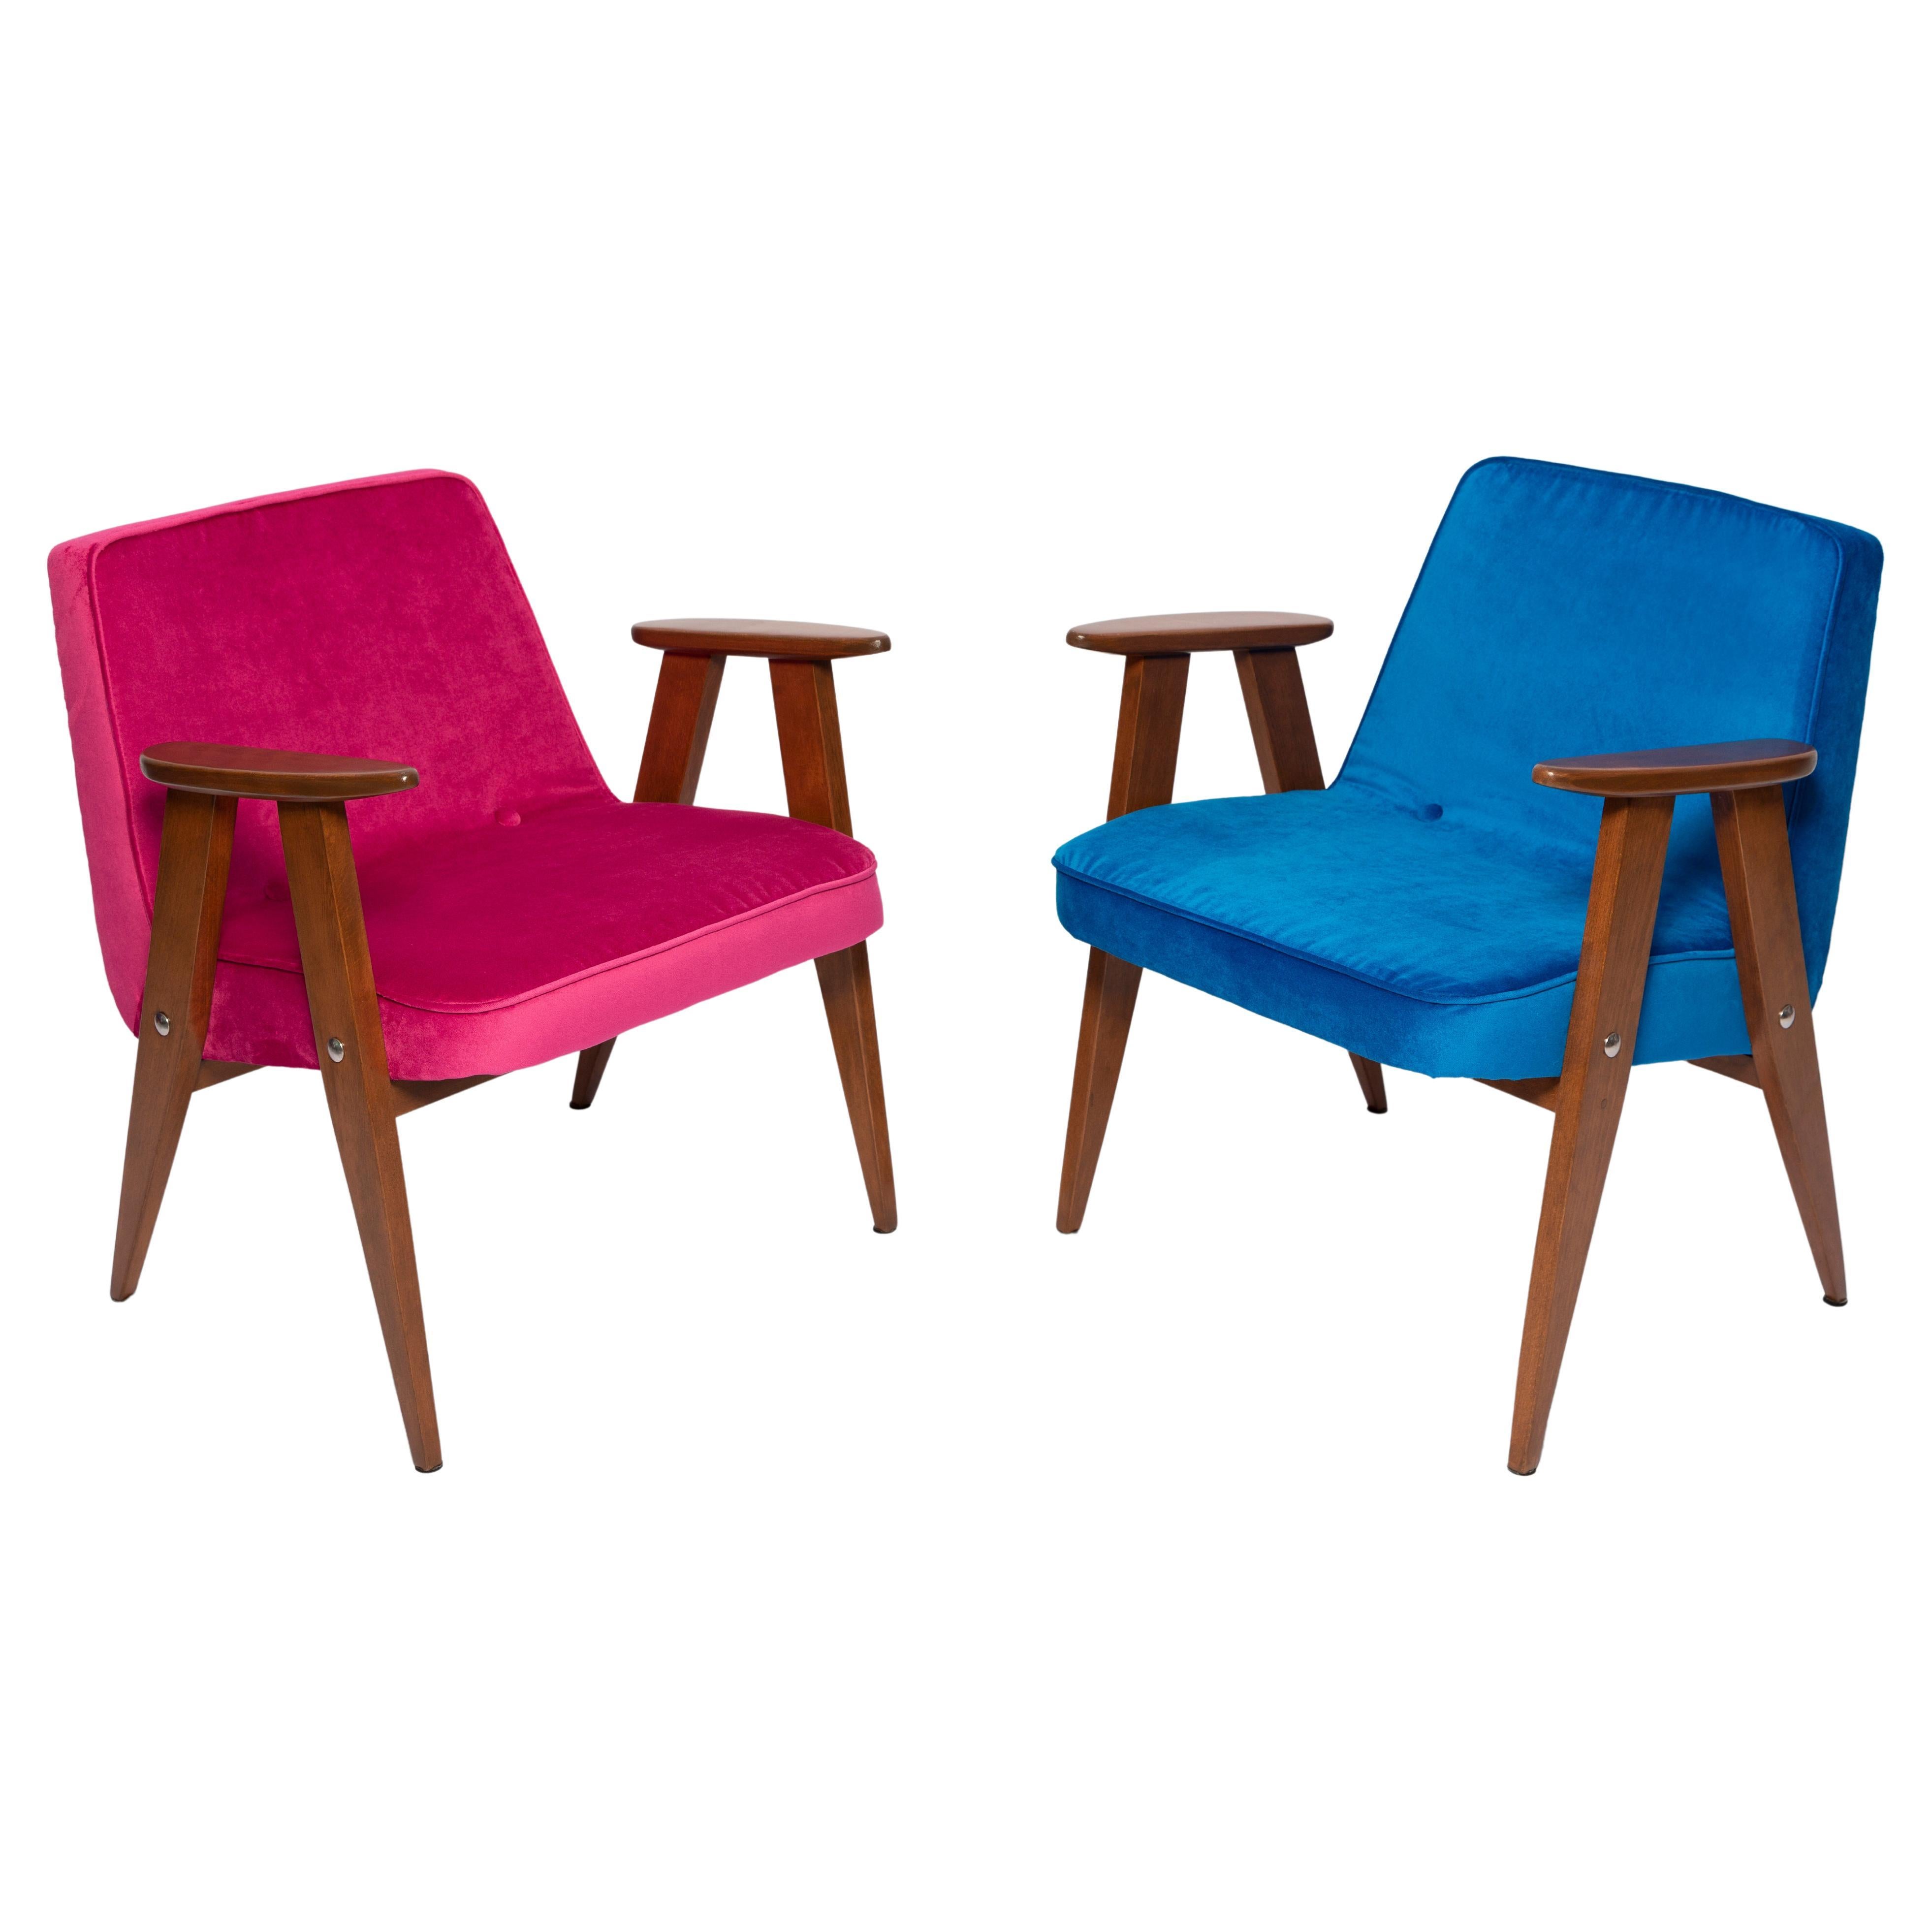 Pair of Mid-Century 366 Armchairs, Pink and Blue, by Chierowski Europe, 1960s For Sale